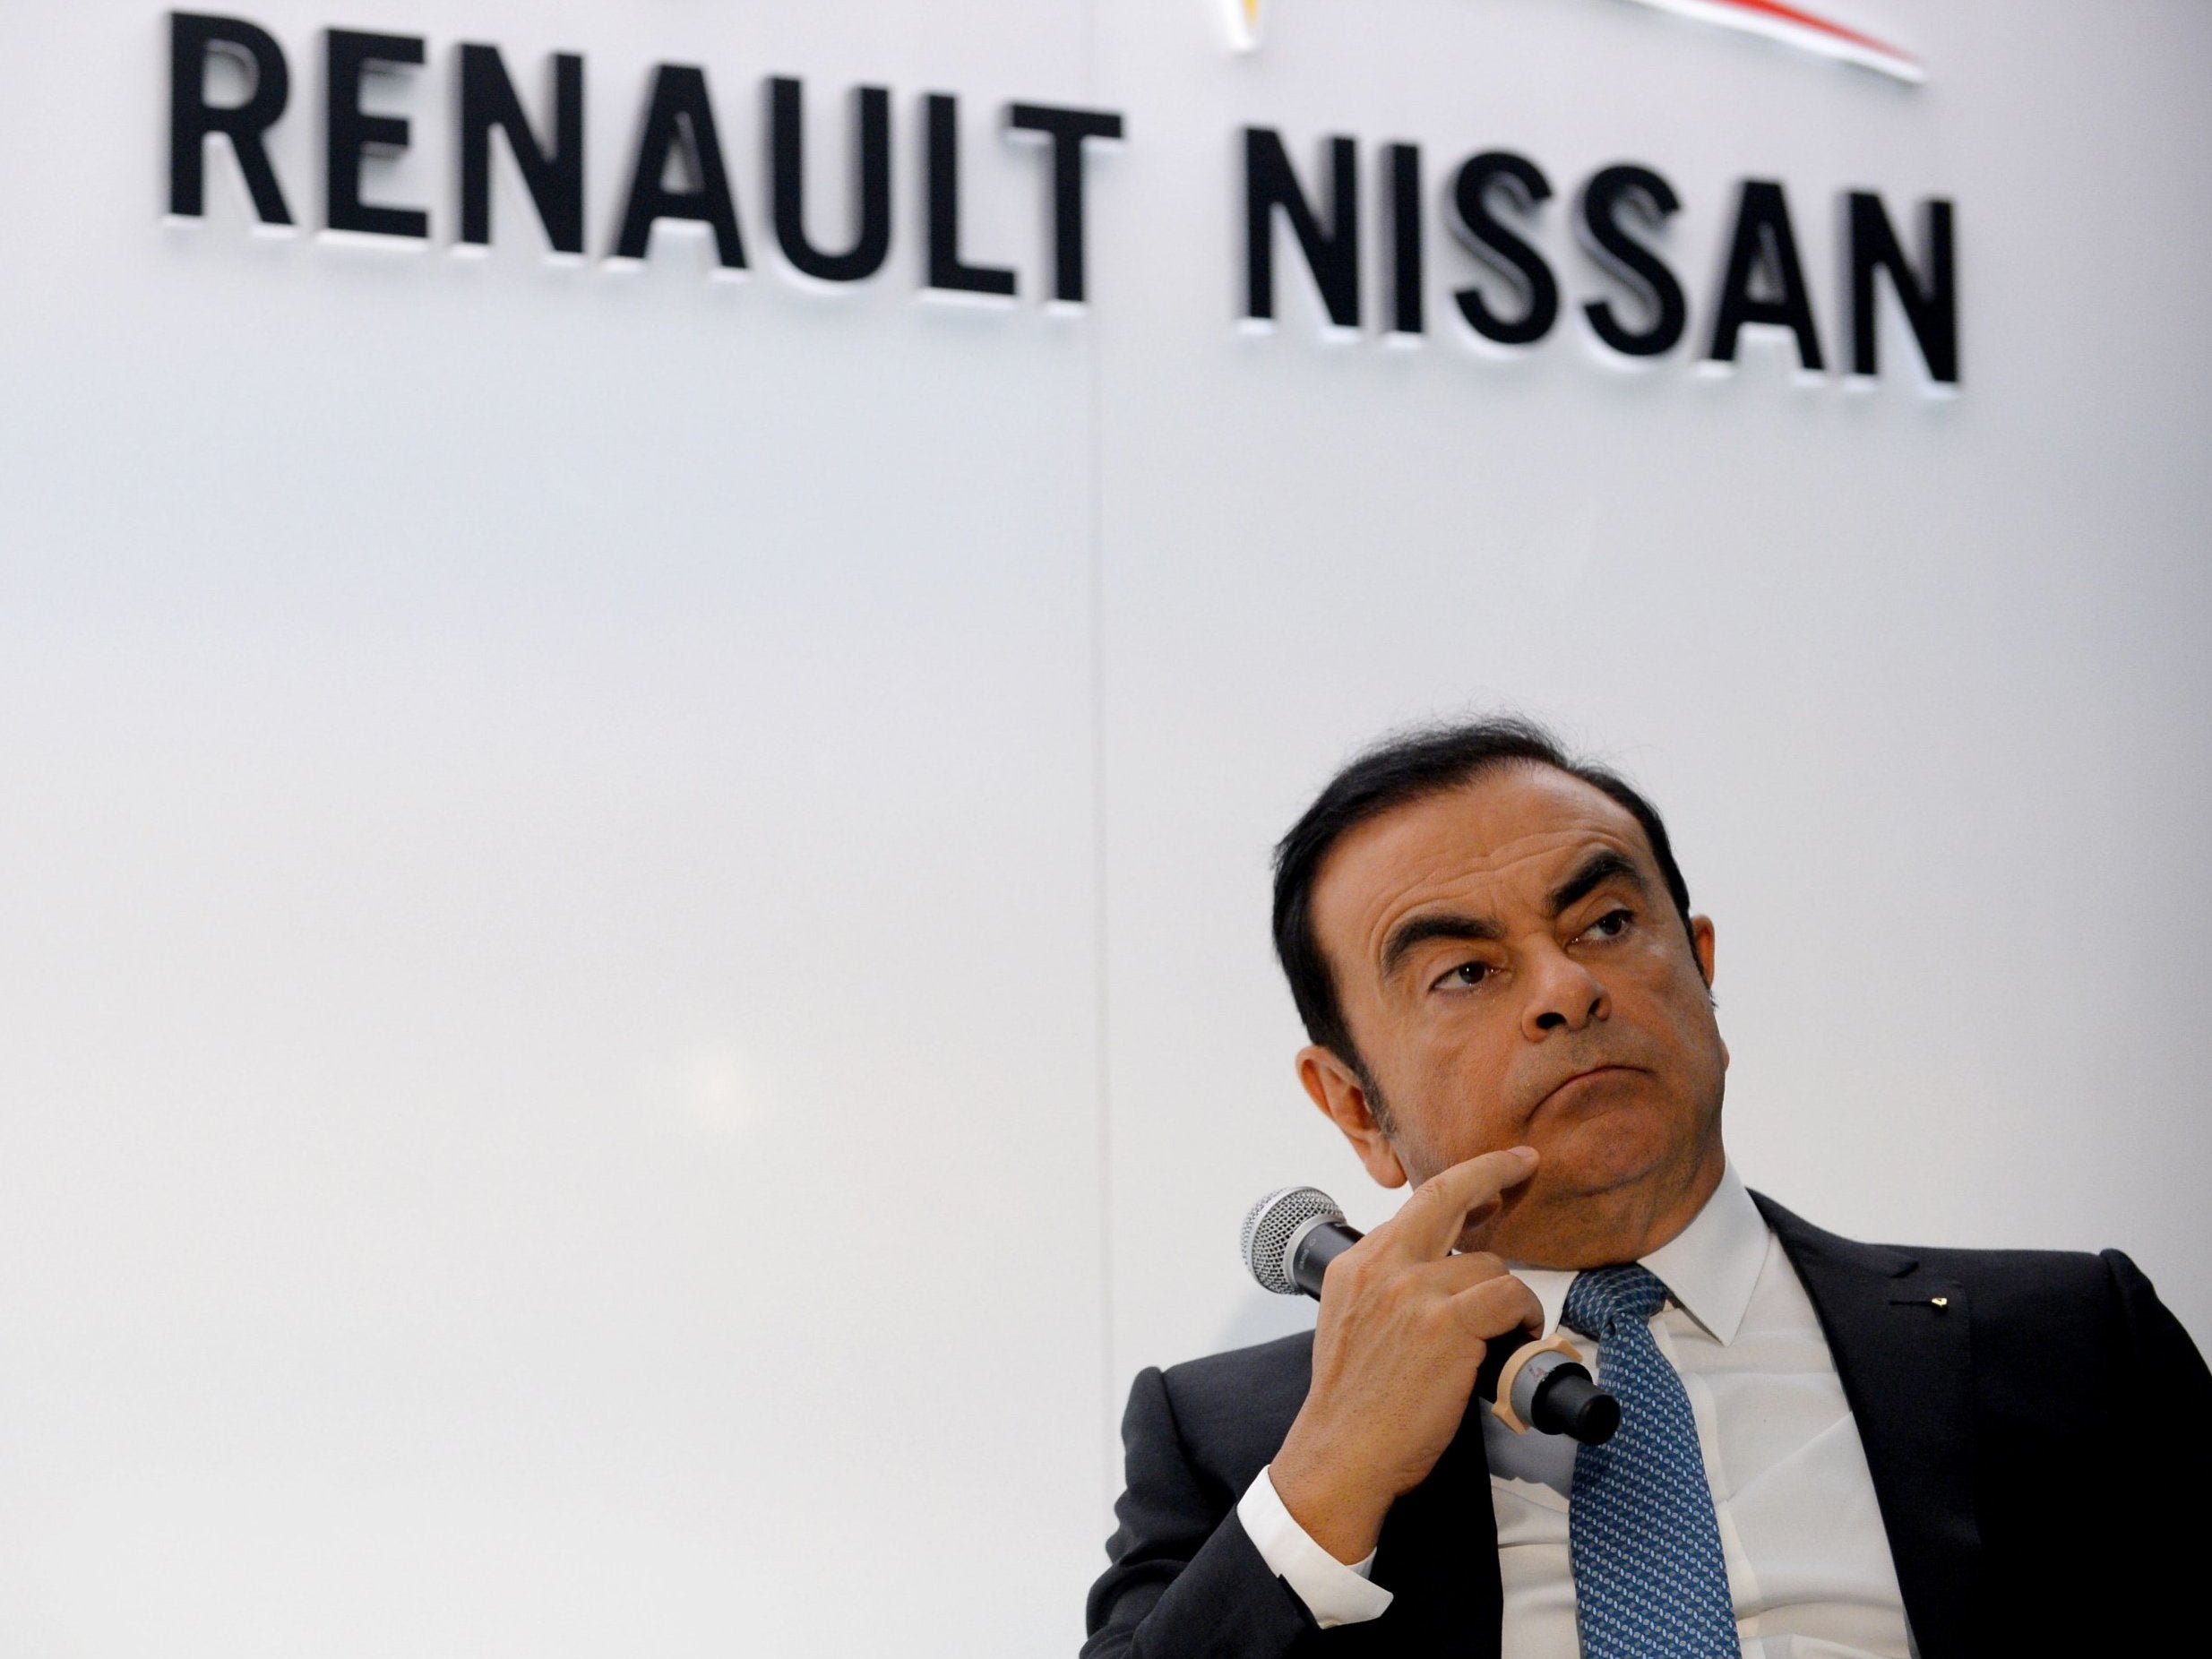 The board said it did not have ‘information concerning Carlos Ghosn’s defence’